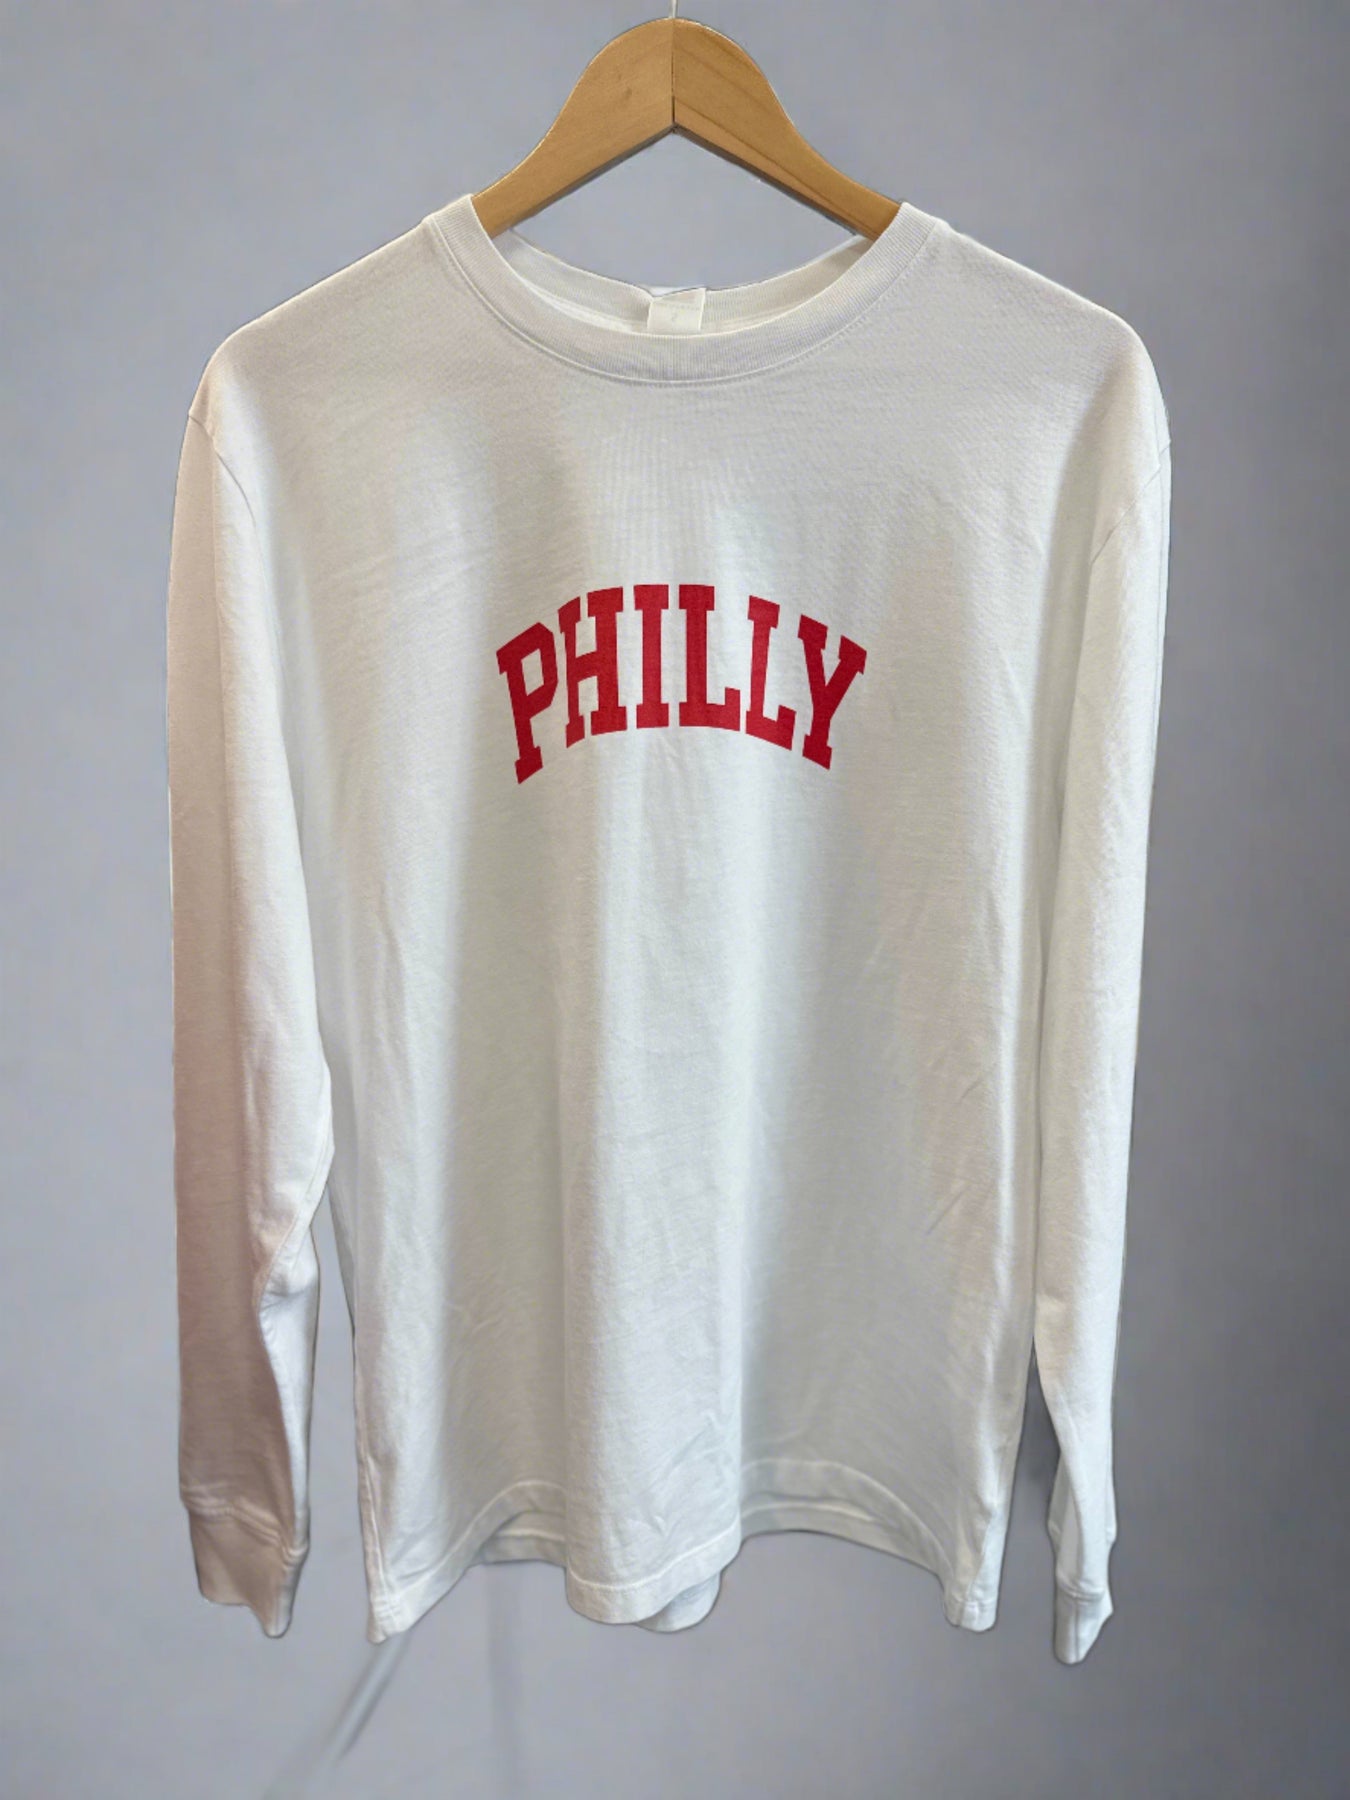 Philly Long Sleeve Cotton Tee